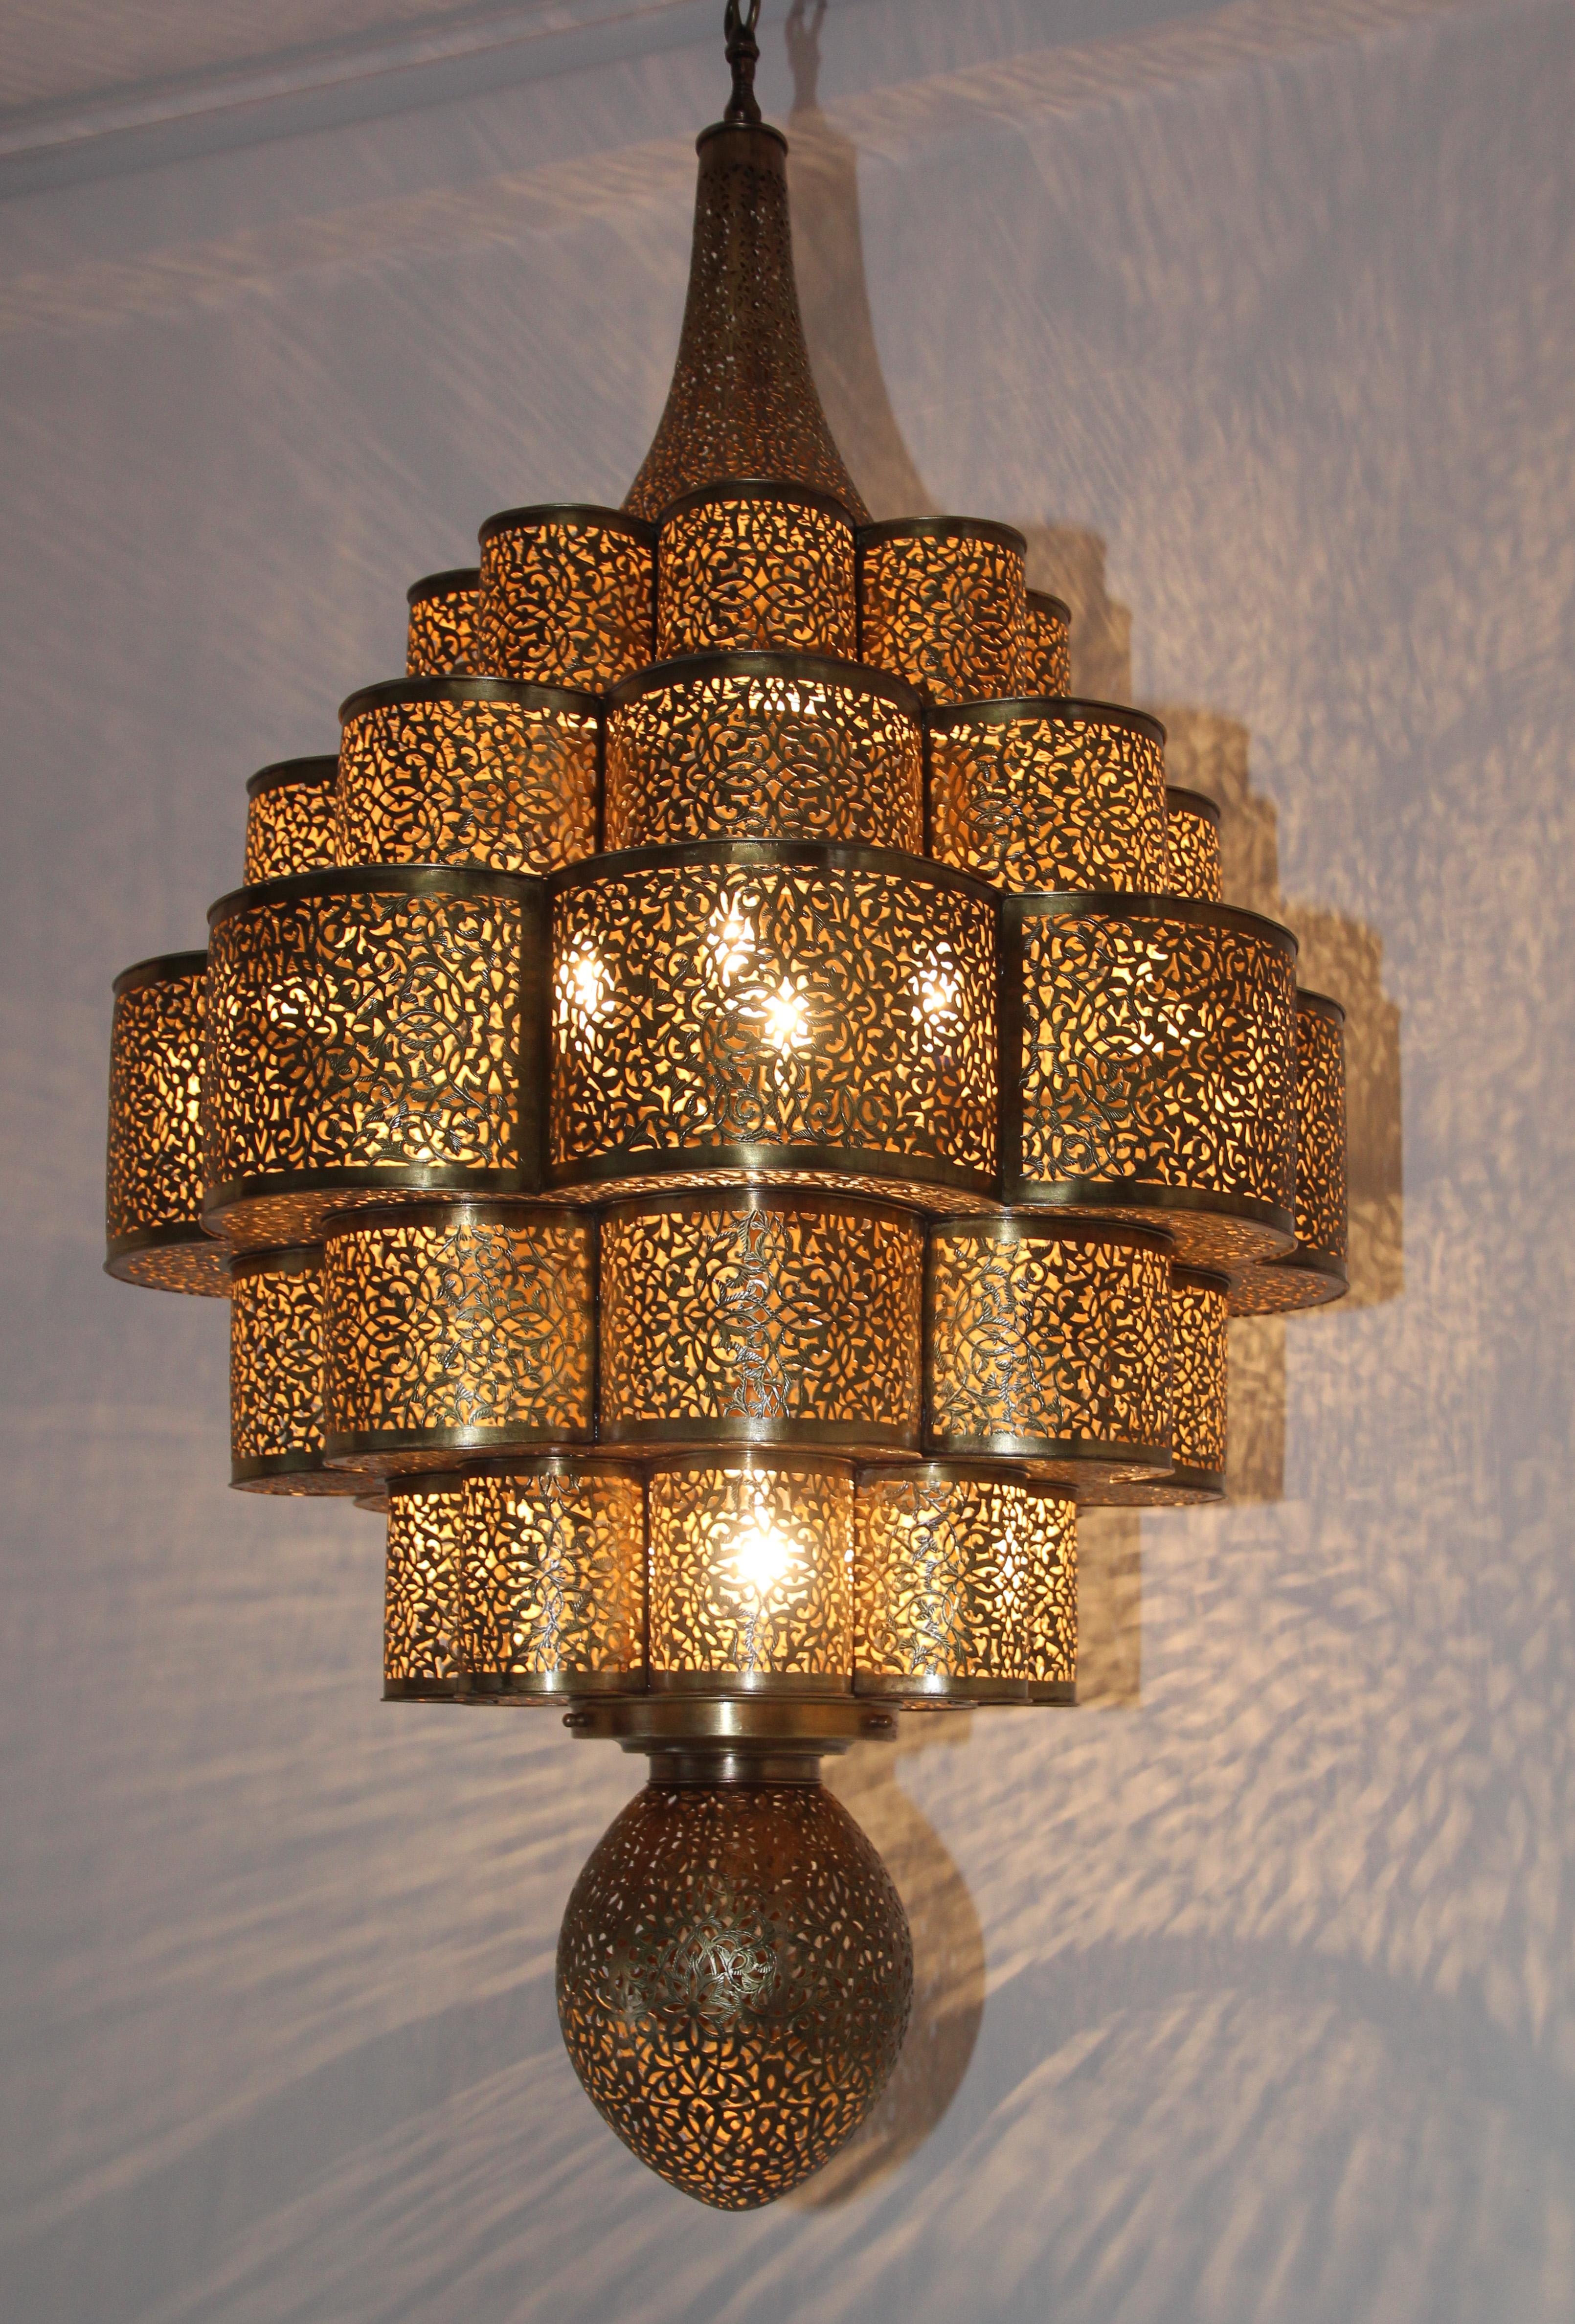 Fabulous finely handcrafted and hand chased Moroccan Moorish brass Alhambra hanging chandelier.
This Alhambra Moroccan chandelier is made of brass and delicately handcrafted, hand-chase, hand-hammered and chiseled, the brass become a fine art like a